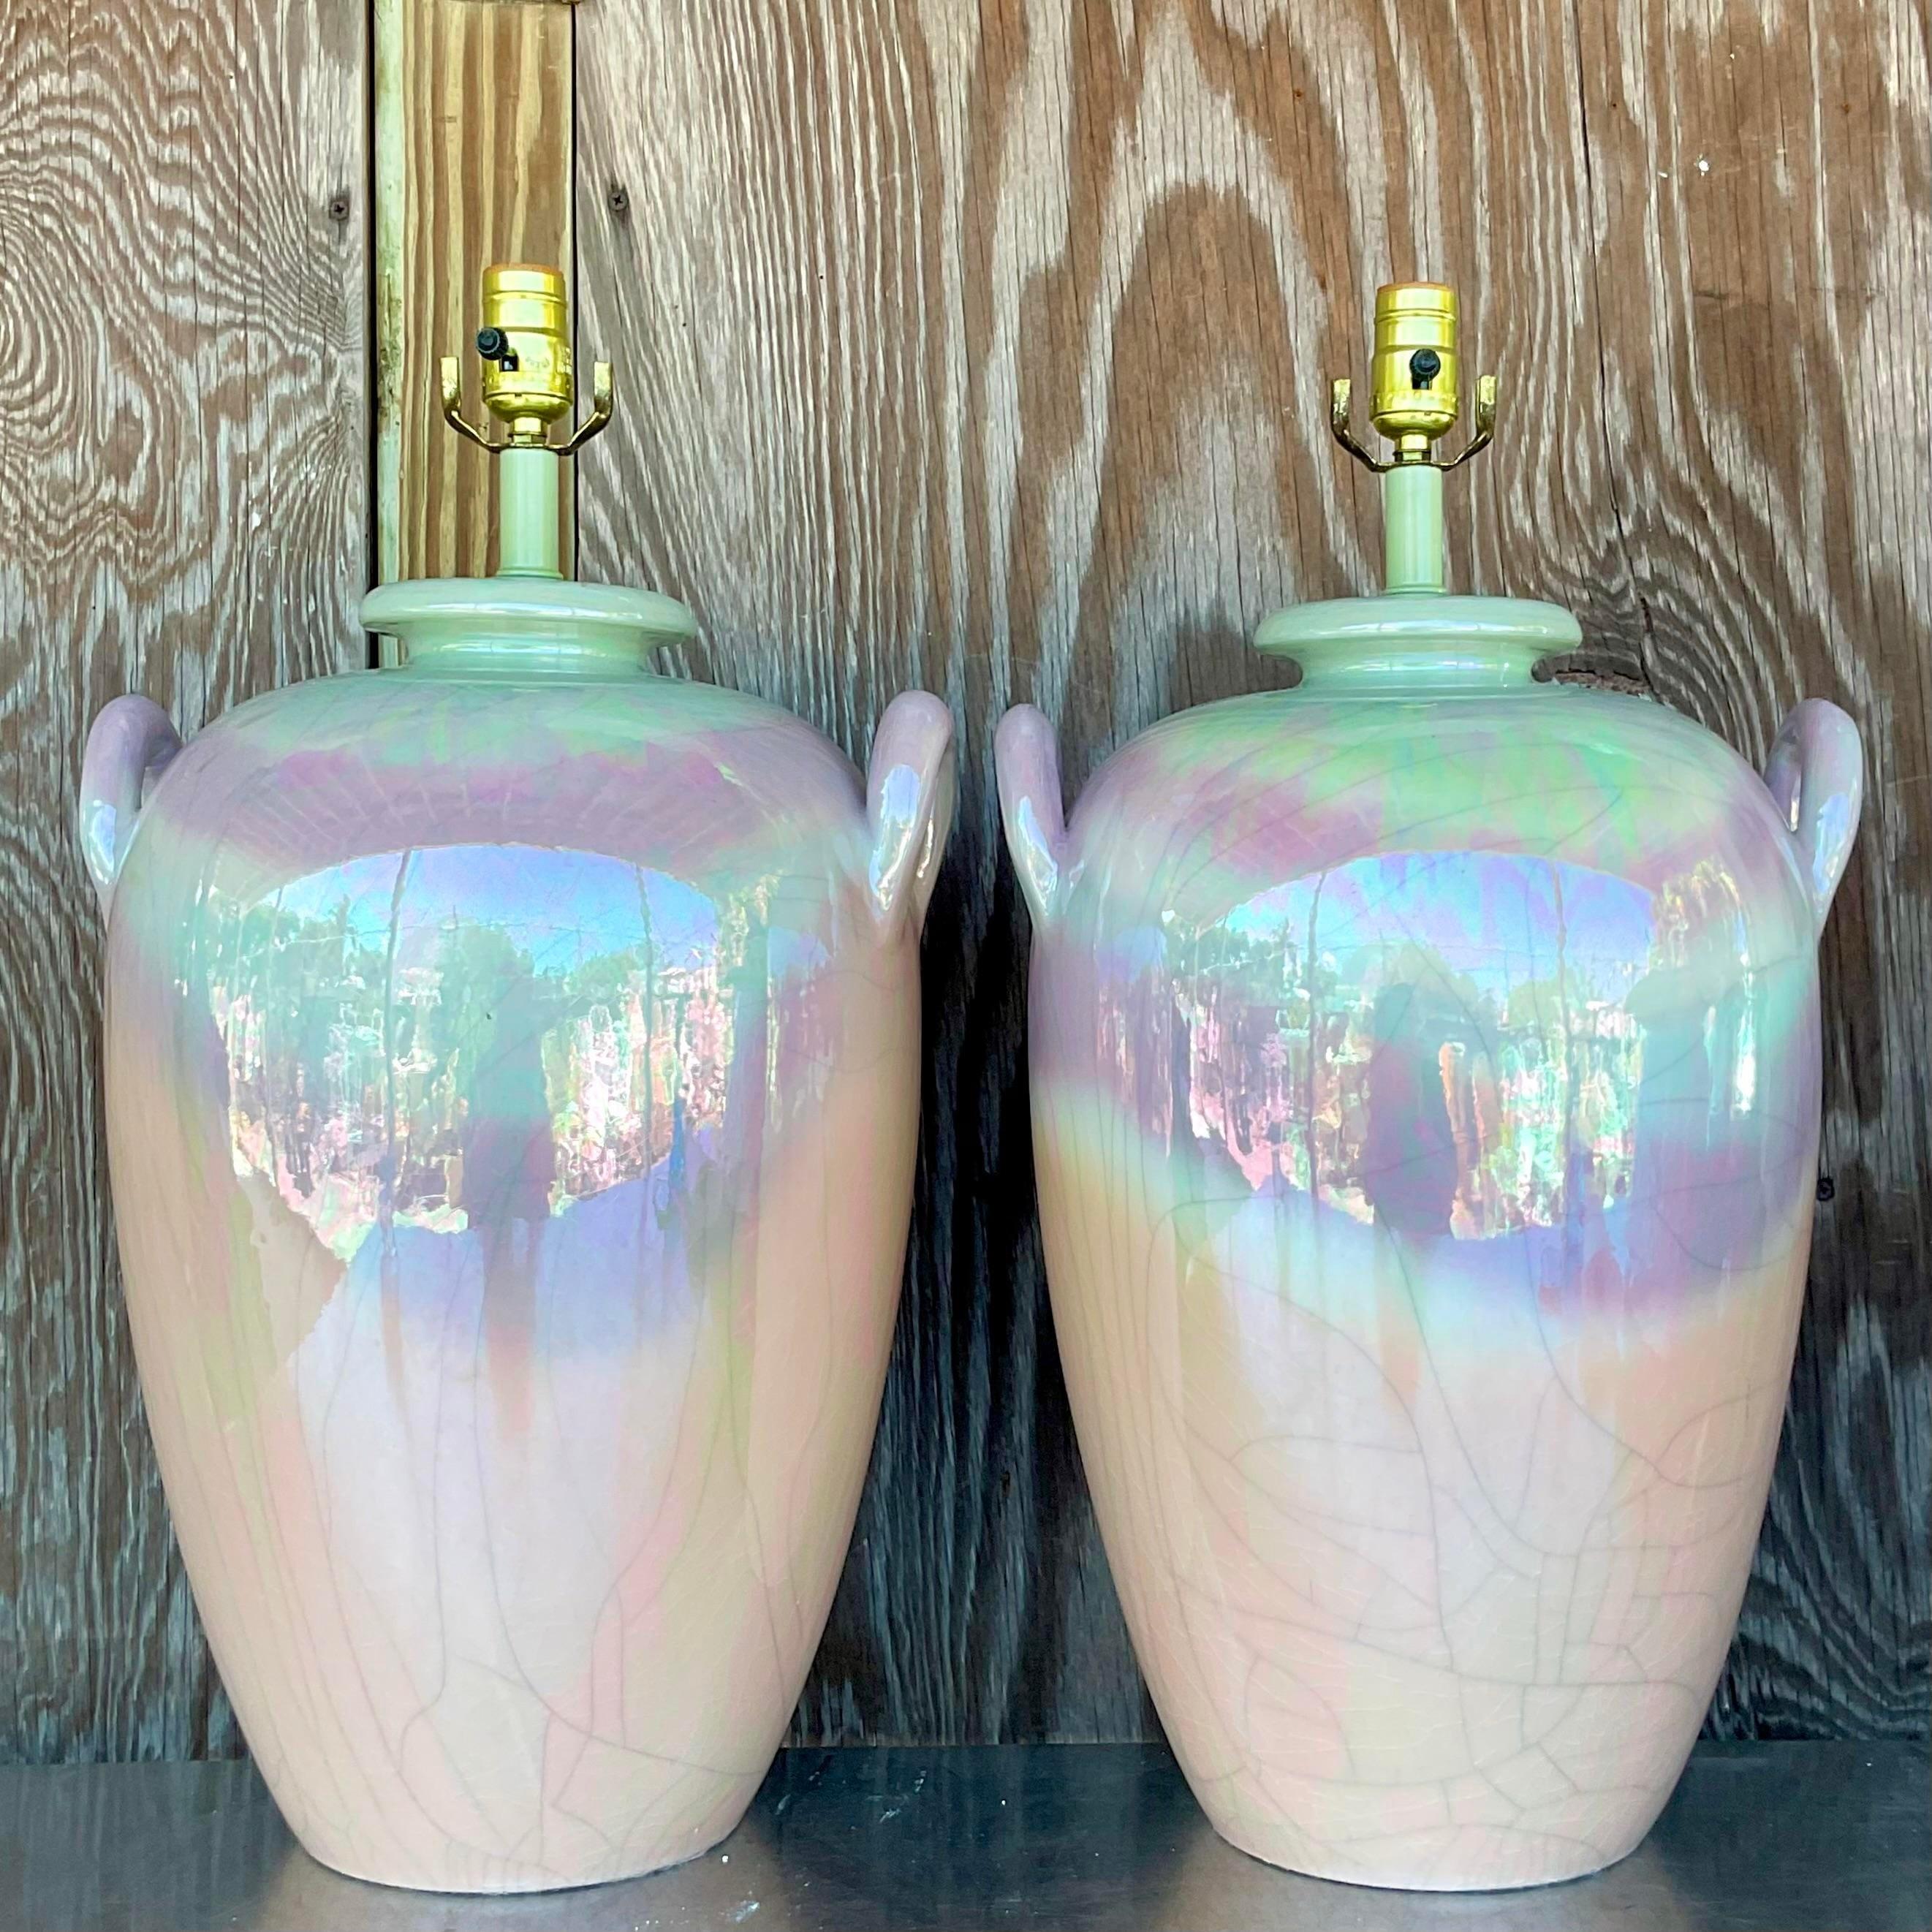 A fabulous pair of vintage Boho table lamps. Beautiful ombré pastel coloration with a crackle glaze finish. Acquired from a Palm Beach estate.